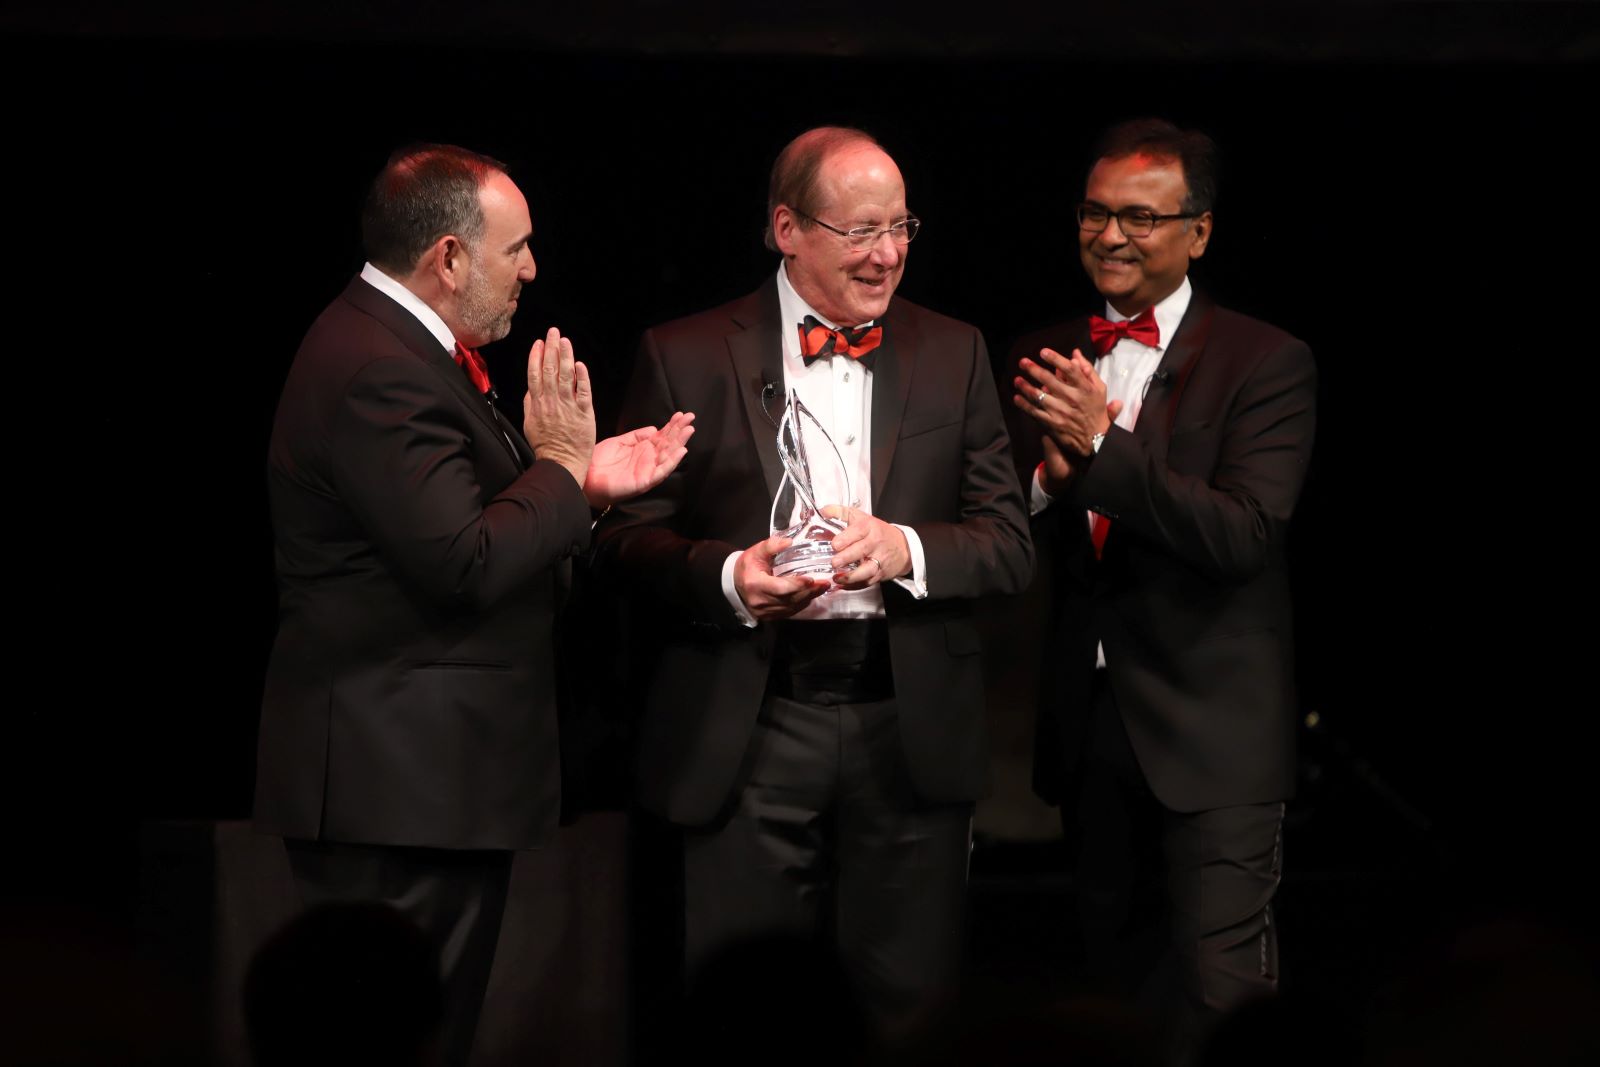 Hartford Hospital Physician Andrew L. Salner Honored with Lifetime Achievement Award at Black & Red